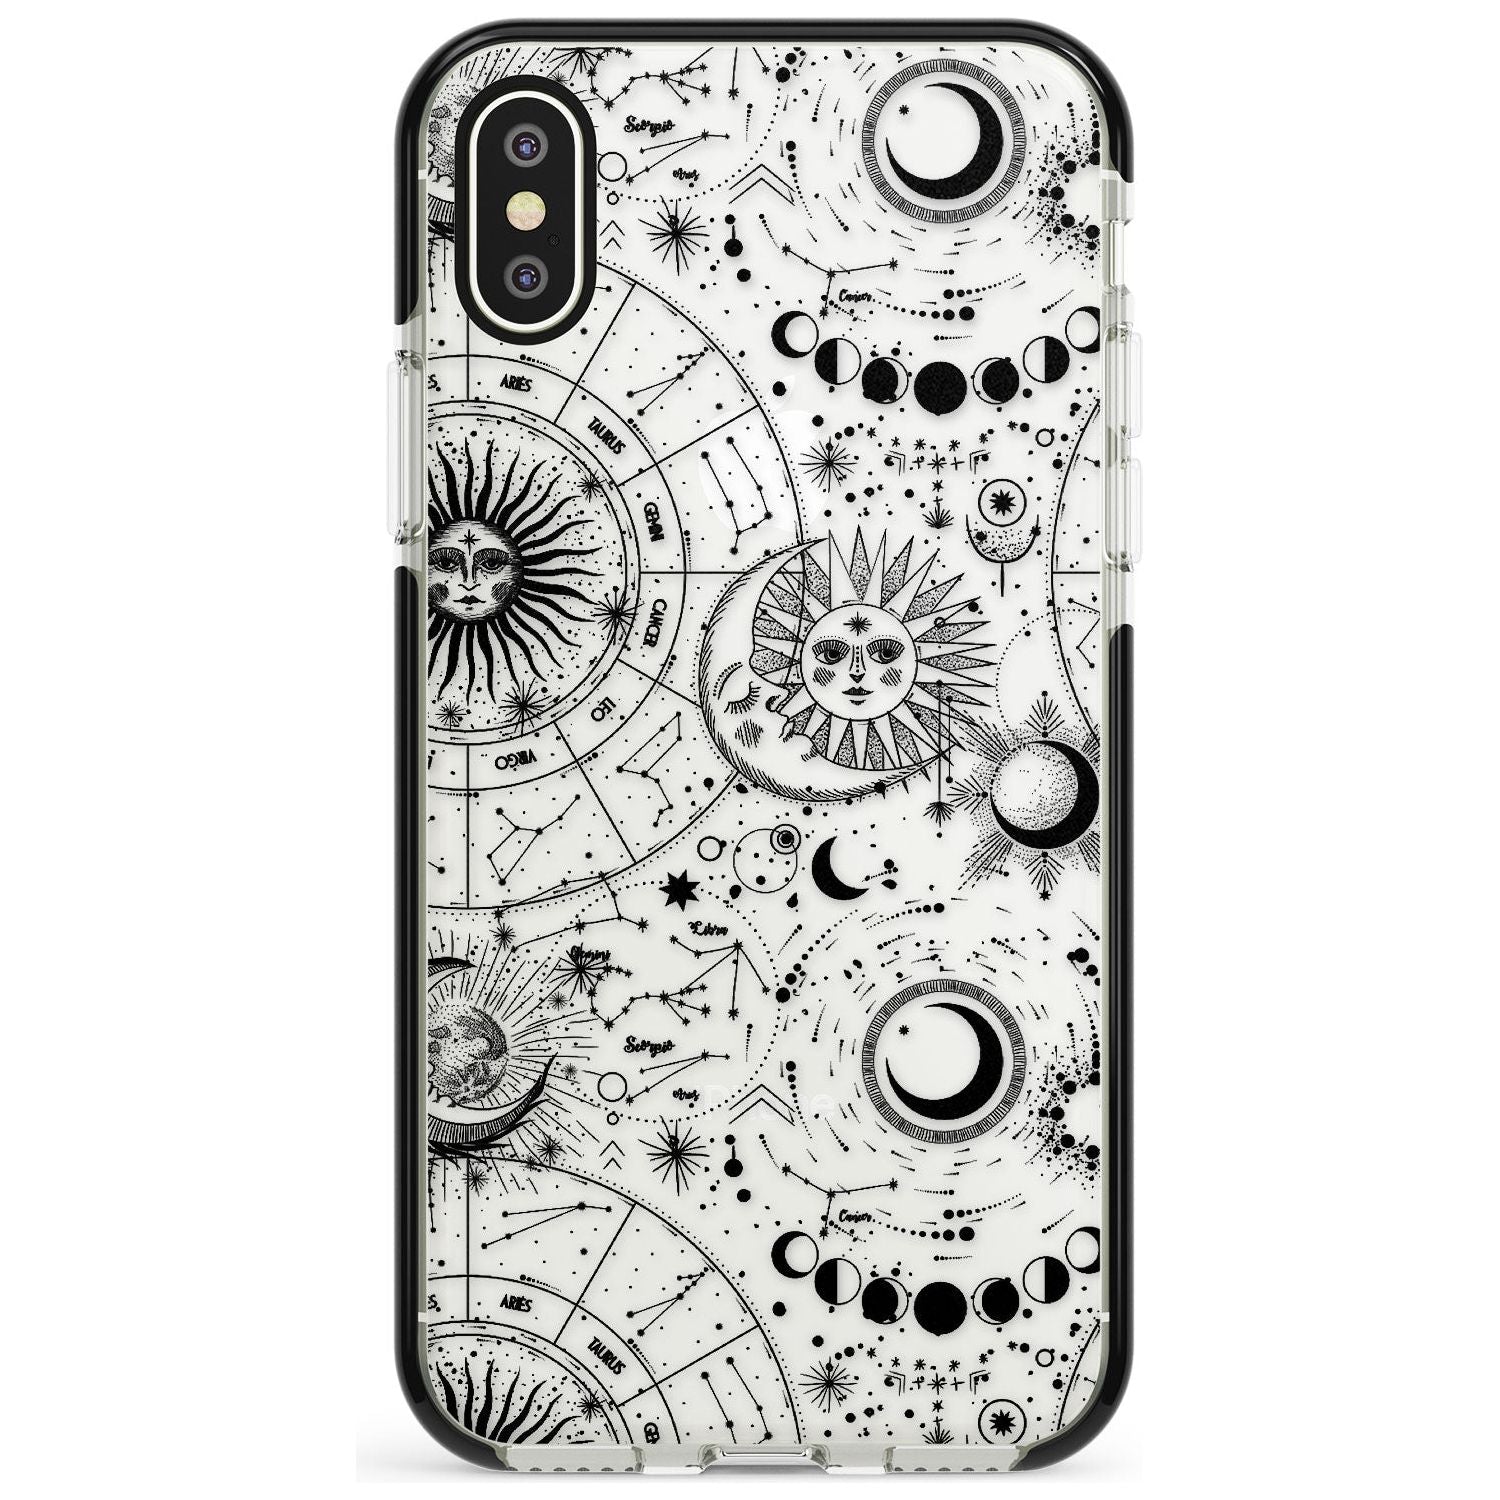 Suns, Moons, Zodiac Signs Astrological Black Impact Phone Case for iPhone X XS Max XR